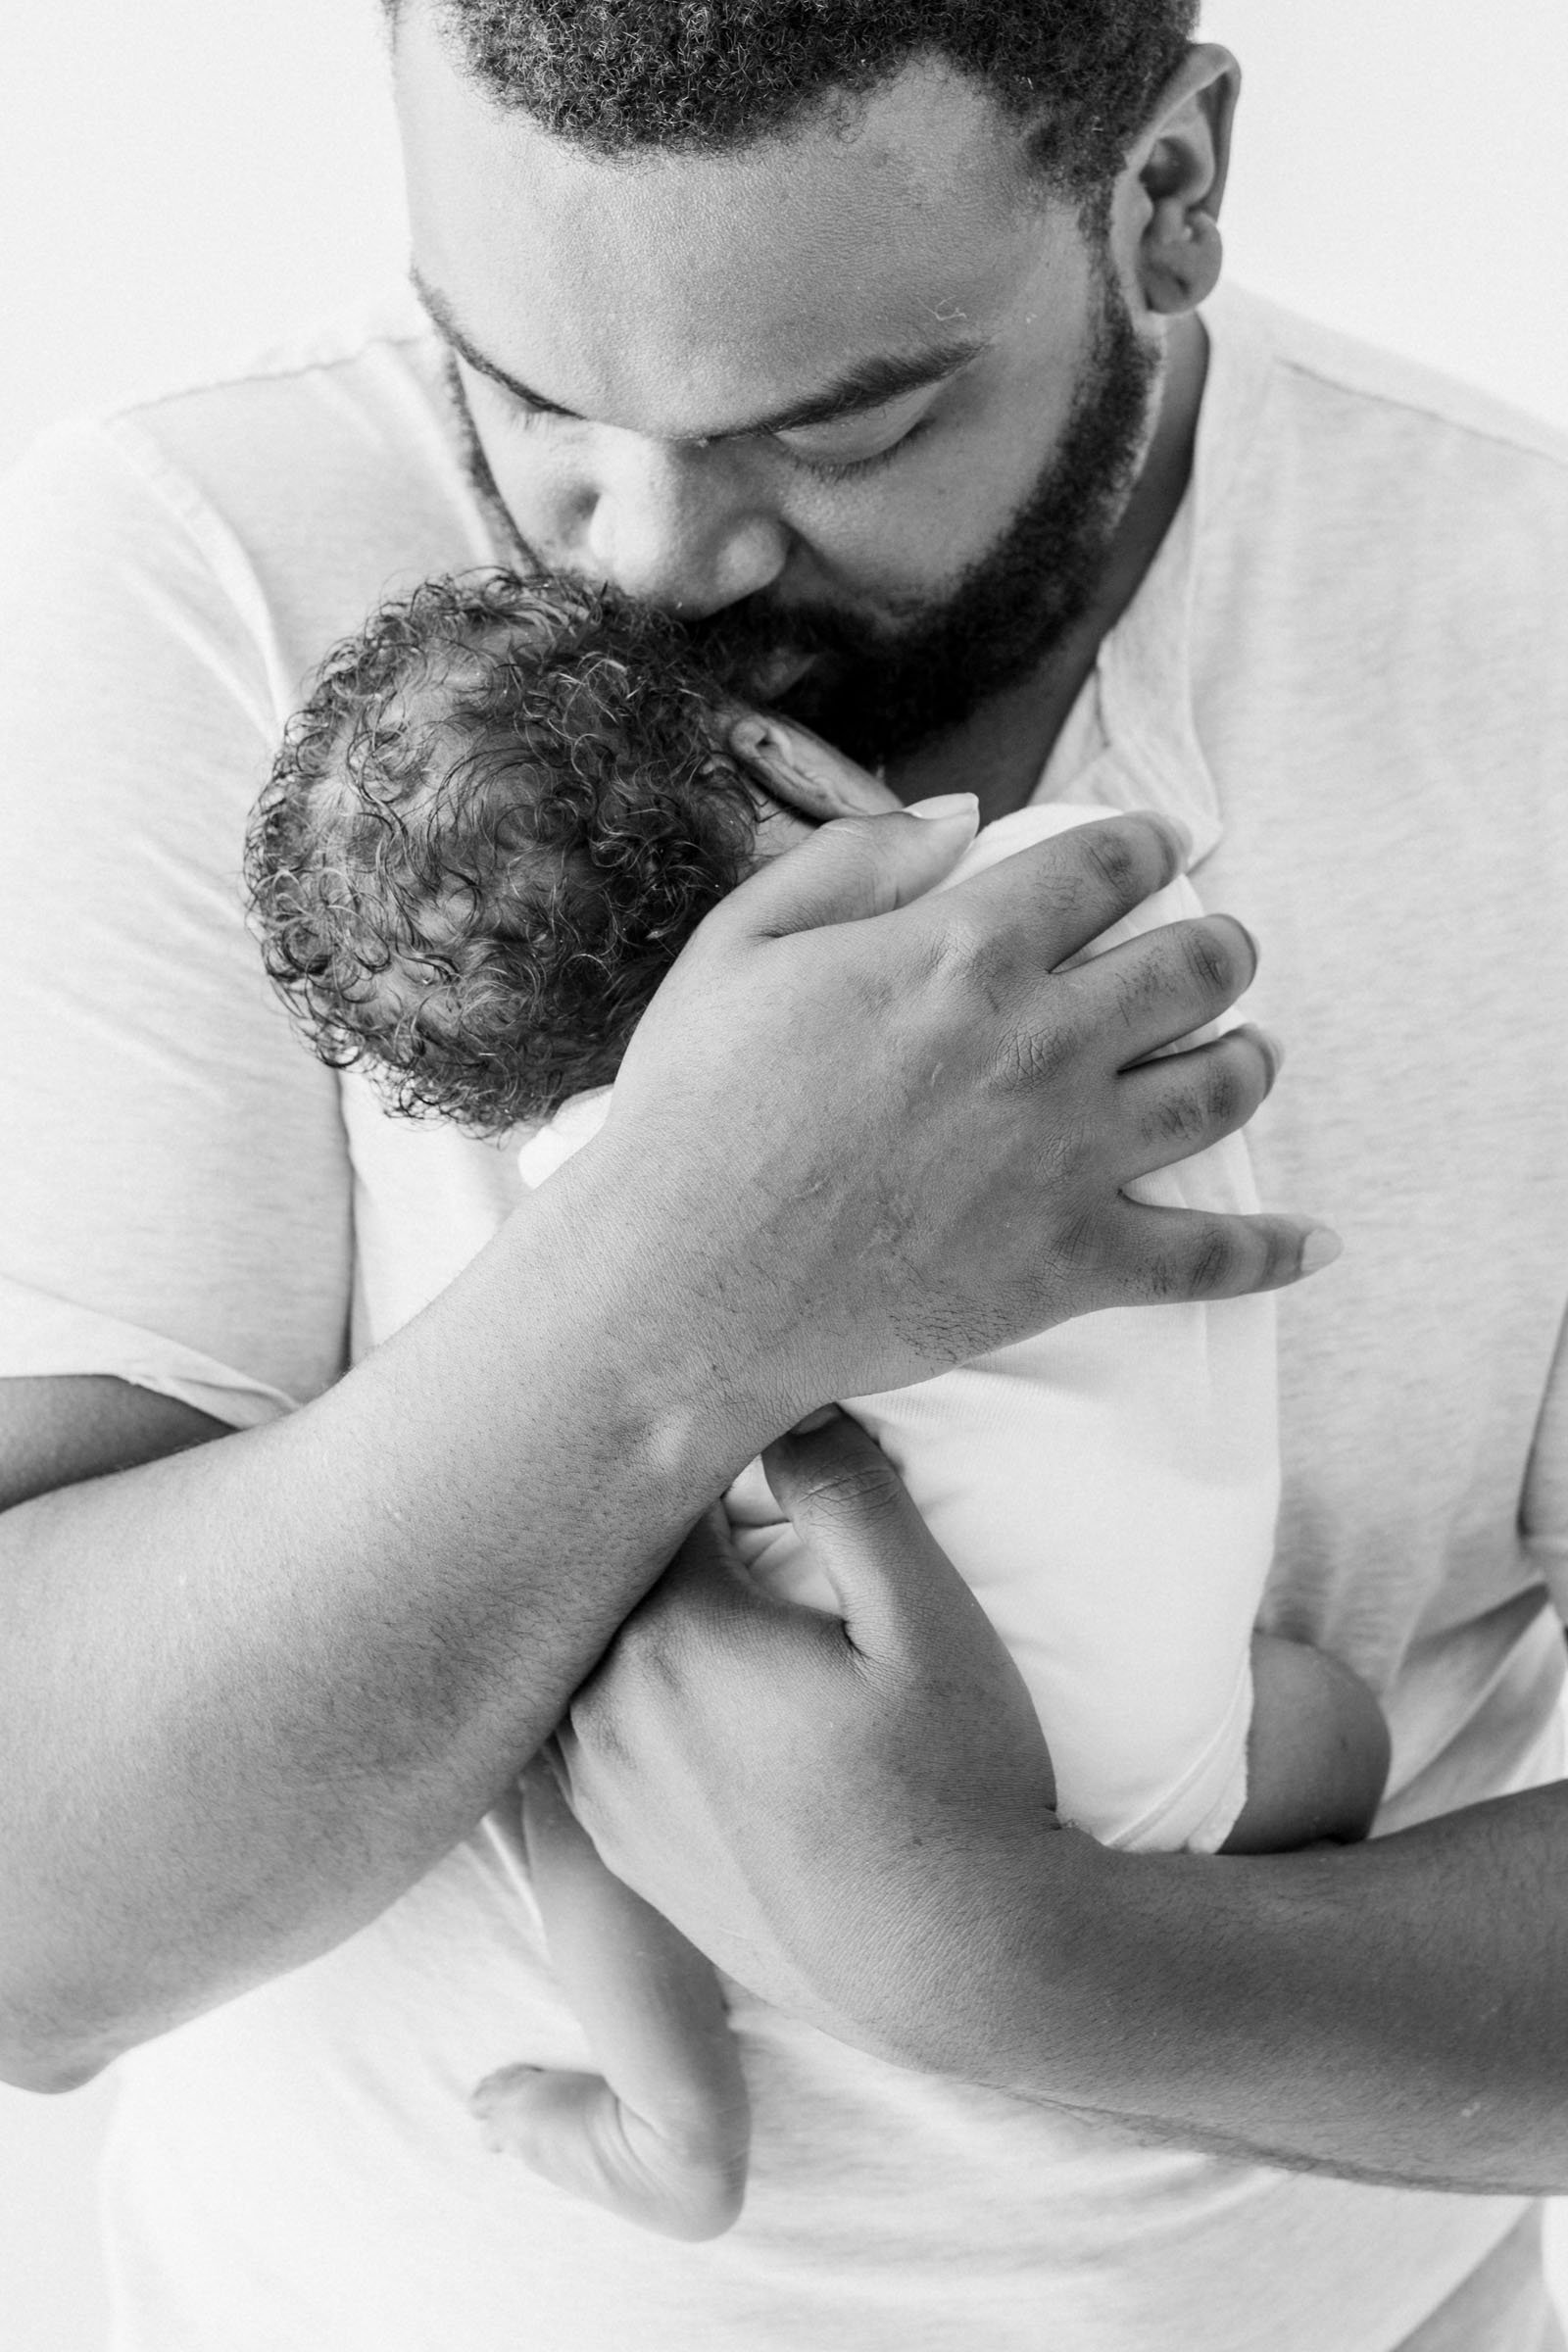  Father cuddles baby and kisses his head captured by Nicole Hawkins Photography from New Jersey. father kisses baby newborn portraits in NJ #nicolehawkinsphotography #NJbabyphotography #newbornportraits #NewJerseyStudioPhotography #newbornsession 